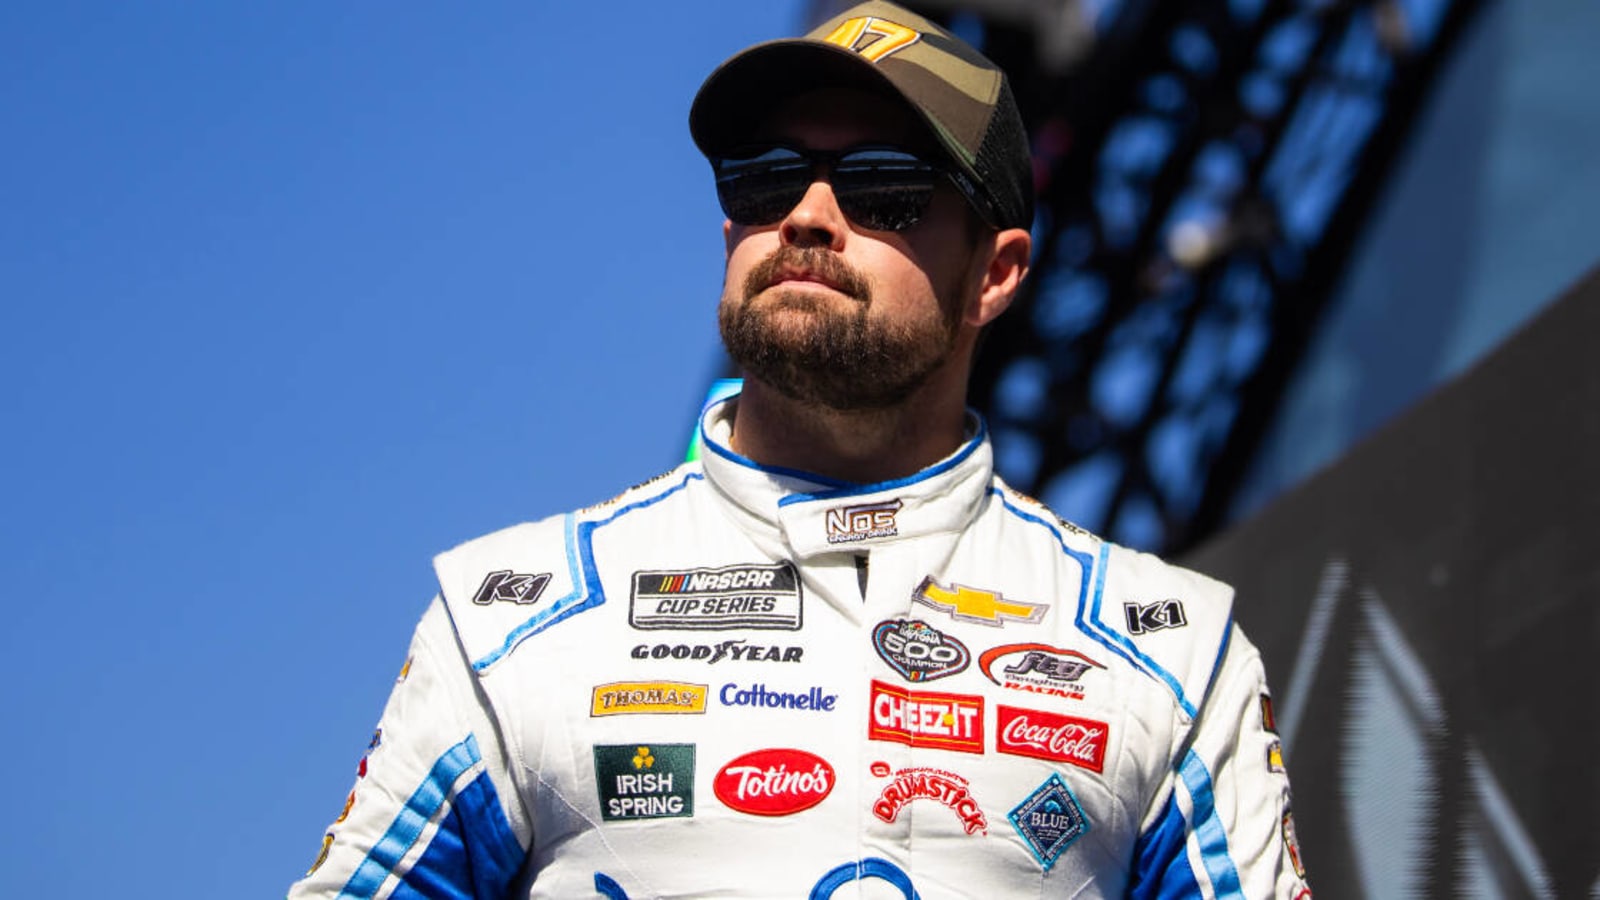 Ricky Stenhouse Jr. signs three-year extension with JTG Daugherty Racing